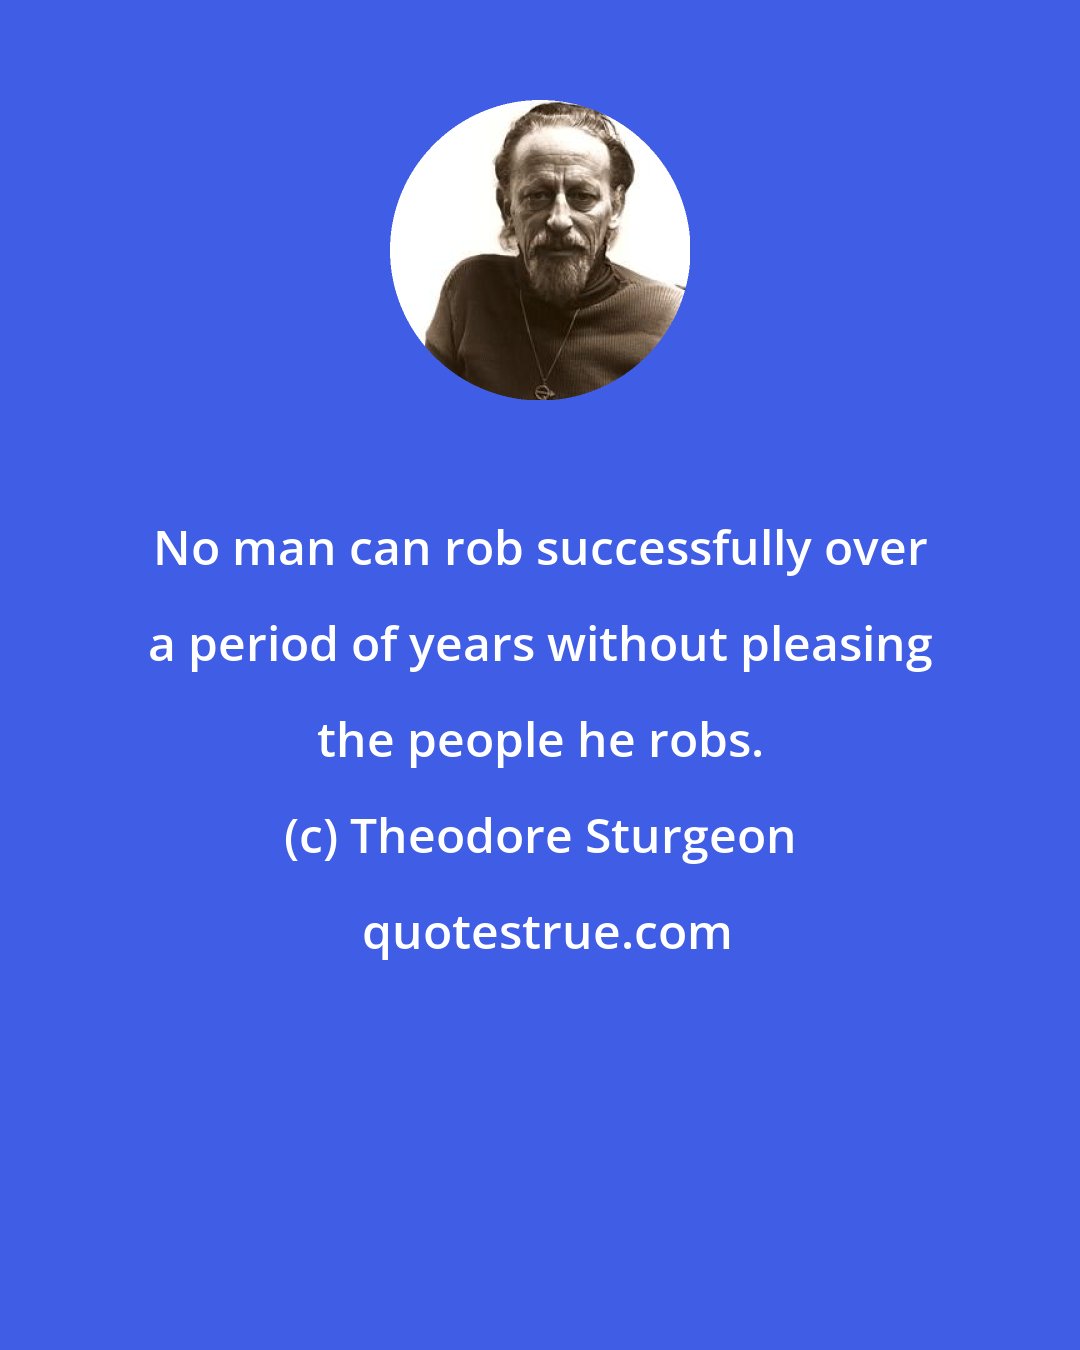 Theodore Sturgeon: No man can rob successfully over a period of years without pleasing the people he robs.